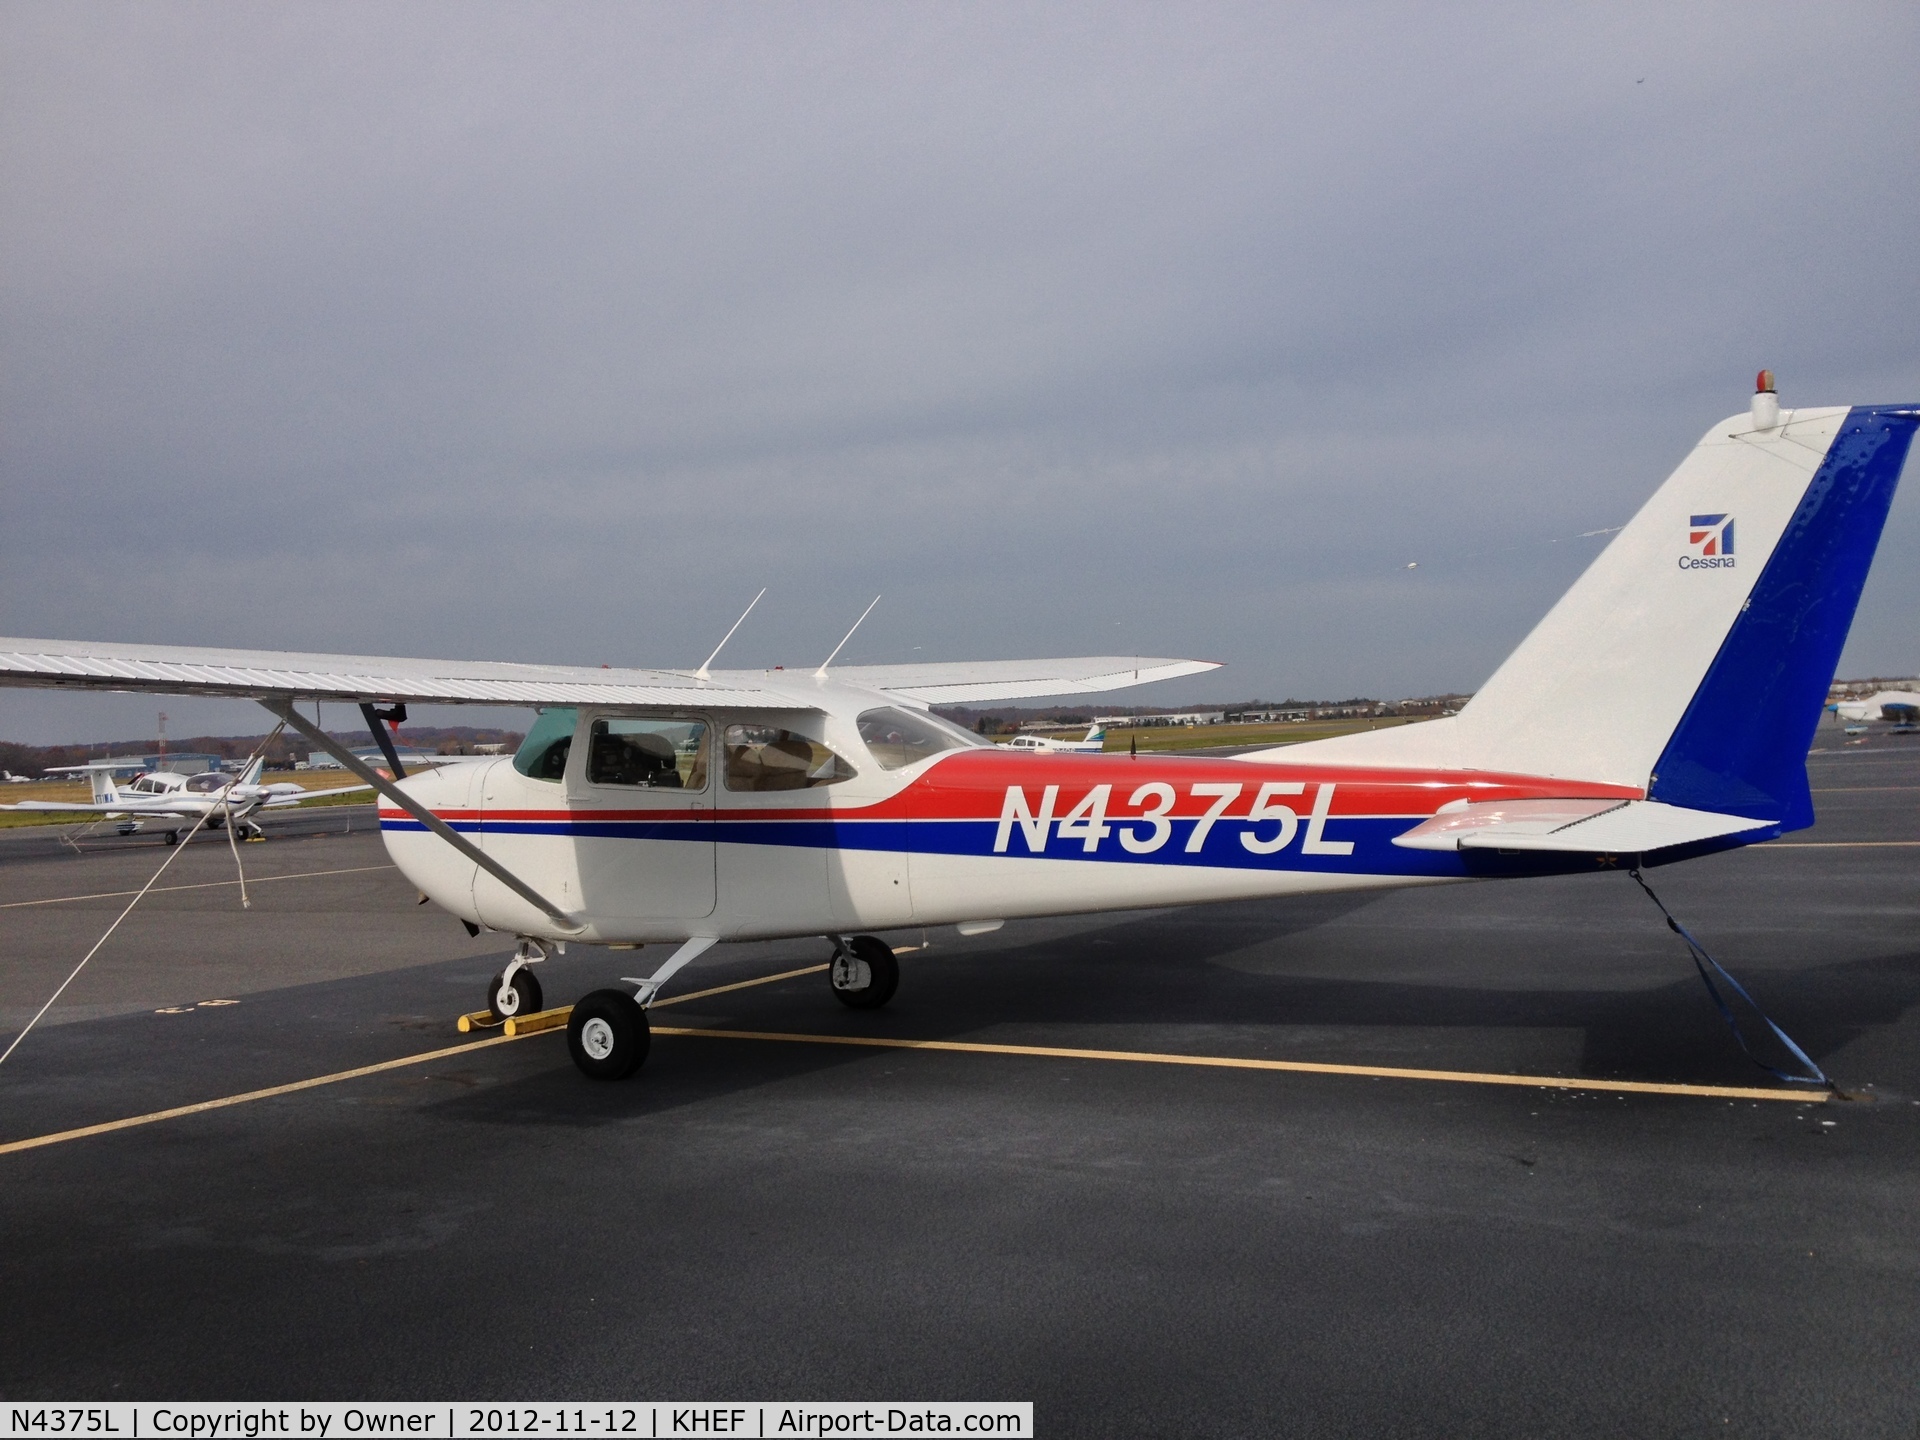 N4375L, 1966 Cessna 172G C/N 17254452, N4375L was completely over hauled summer of 2012. New engine, new interior, and a new paint scheme inspired by the Hallmark 2012 'Sky's the Limit